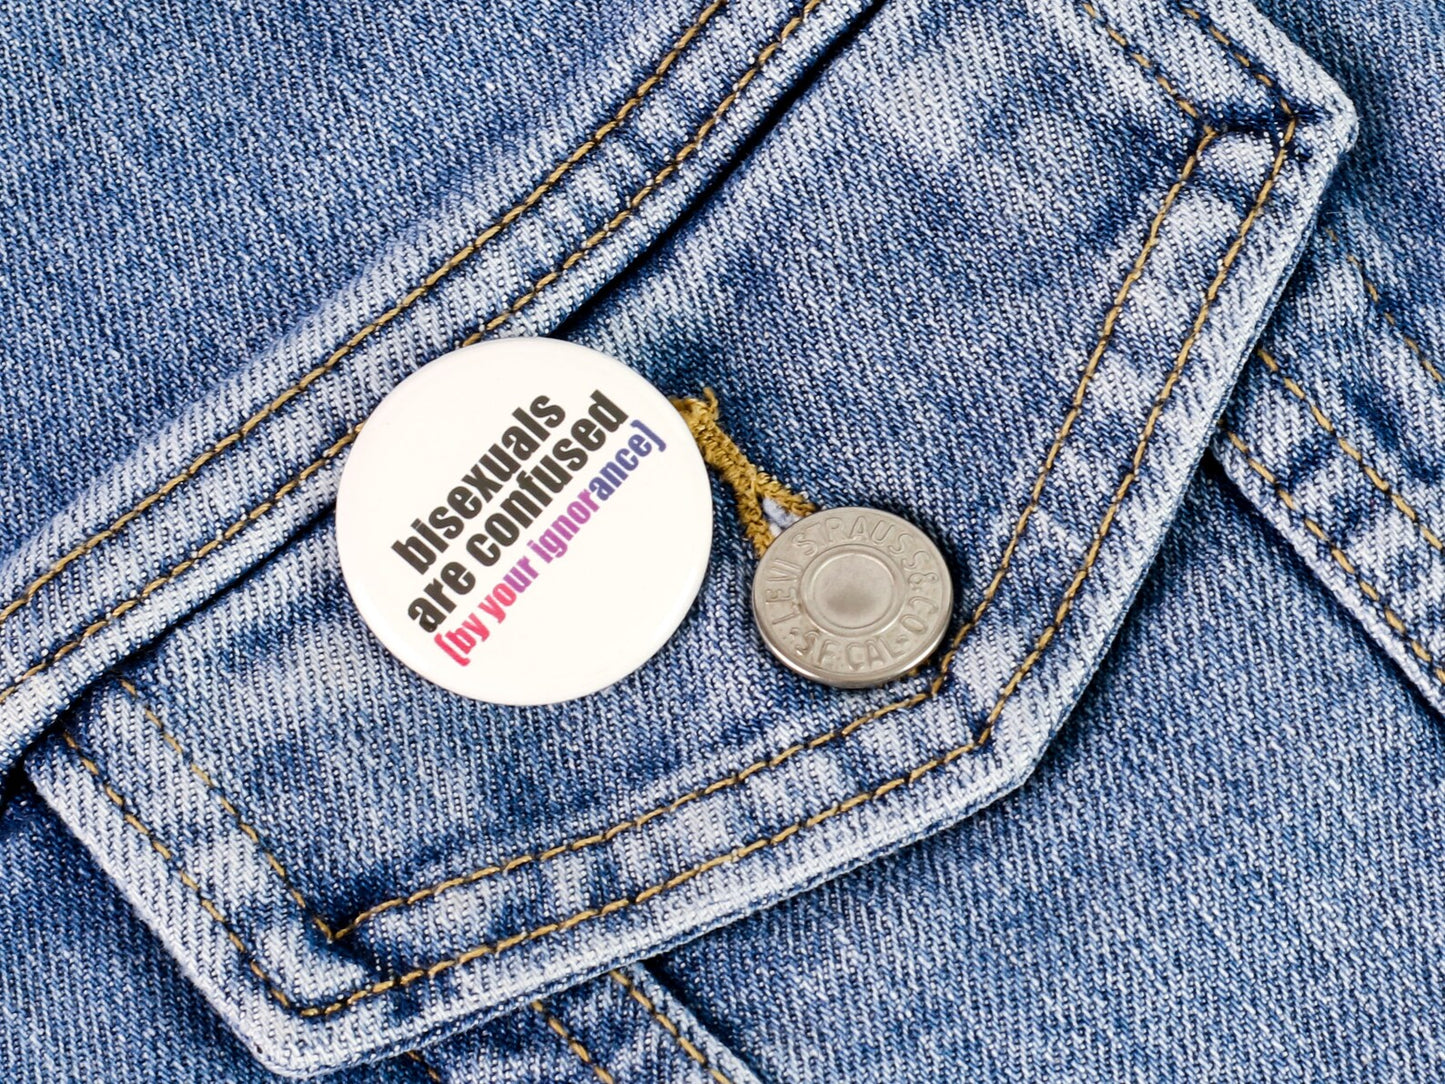 Bisexual Pride Buttons Pinback